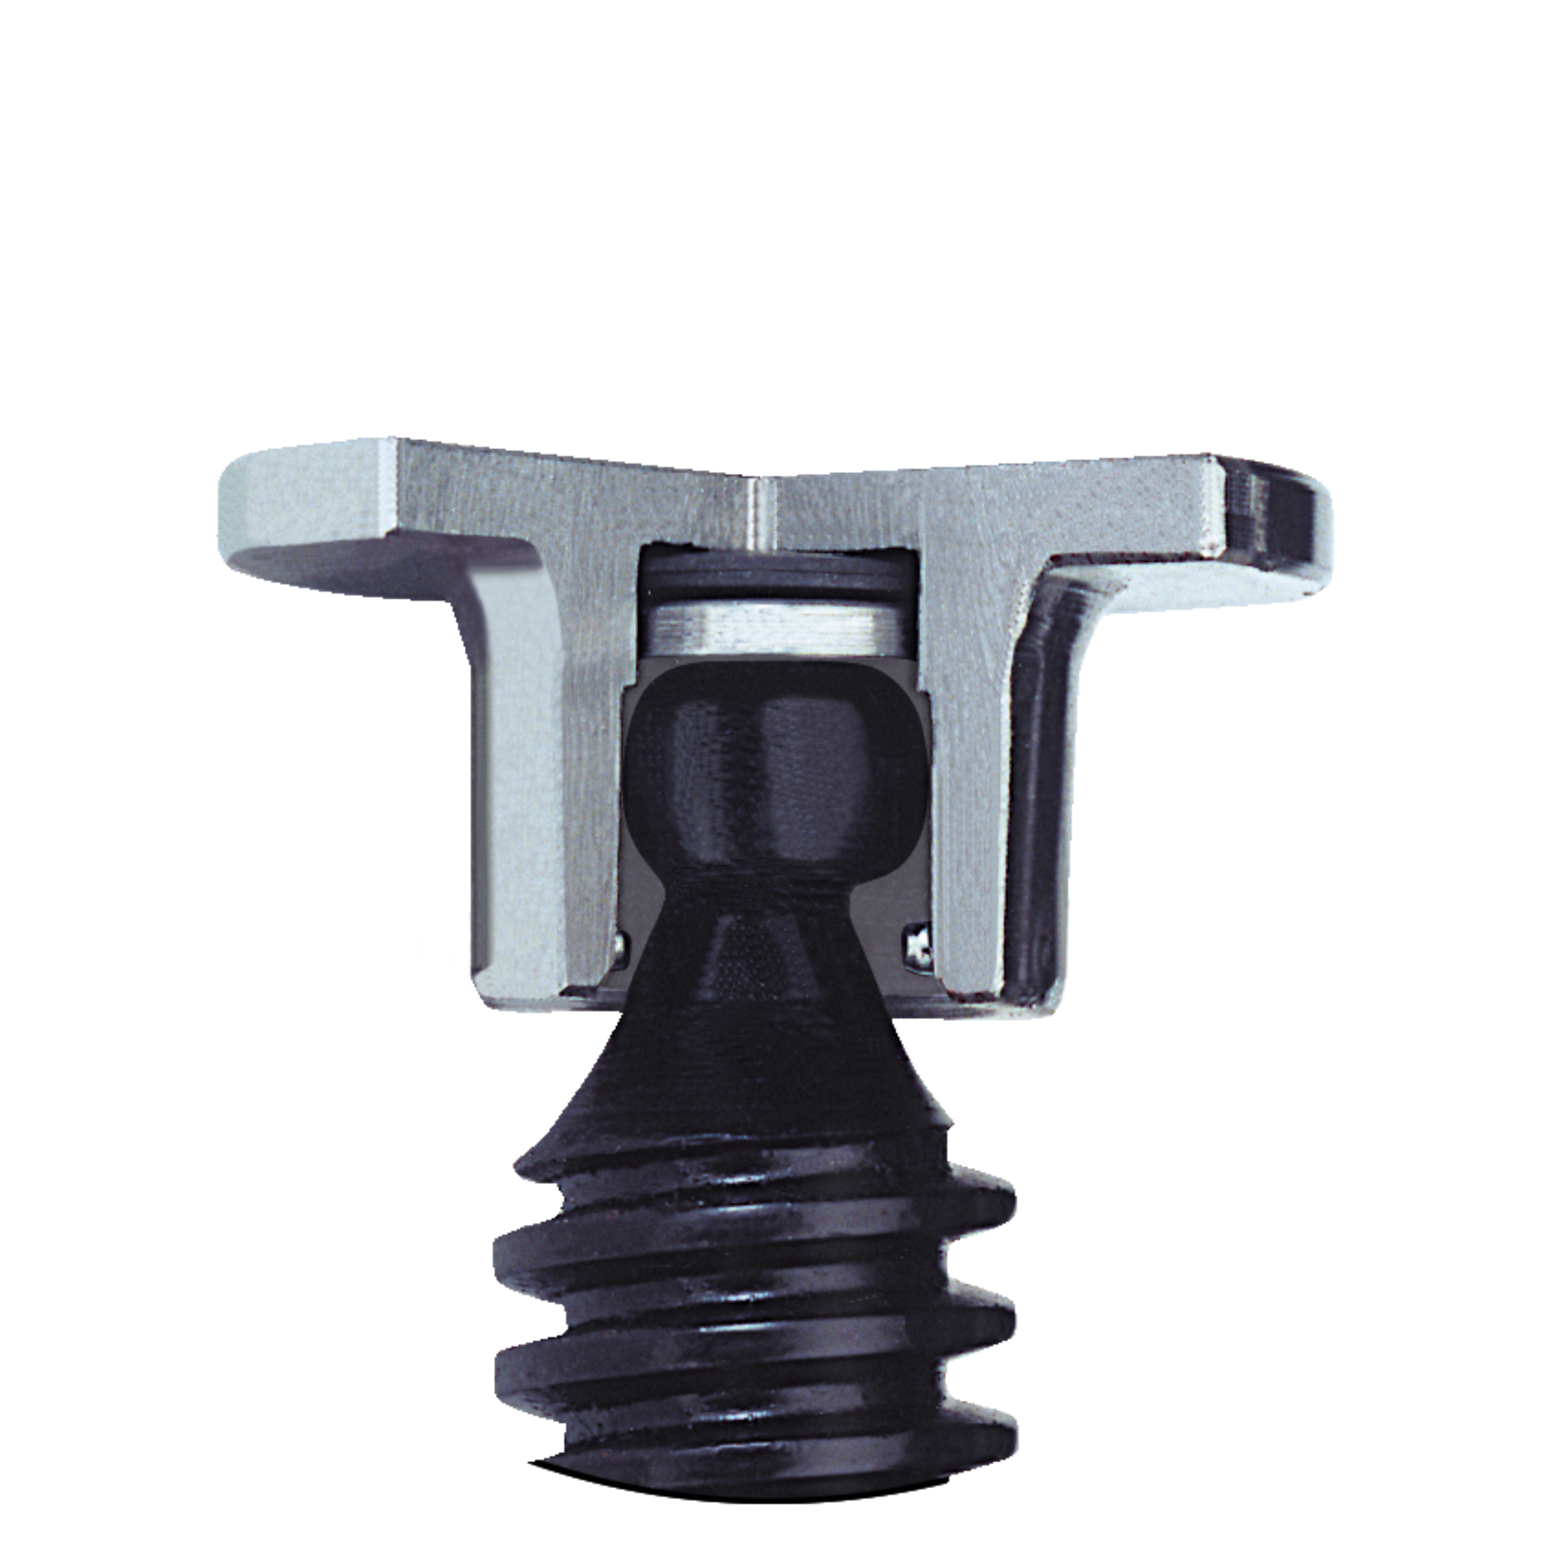 The built-in suspension of the 505P/509P series deep-span tempered cast iron screw clamp in cross-section